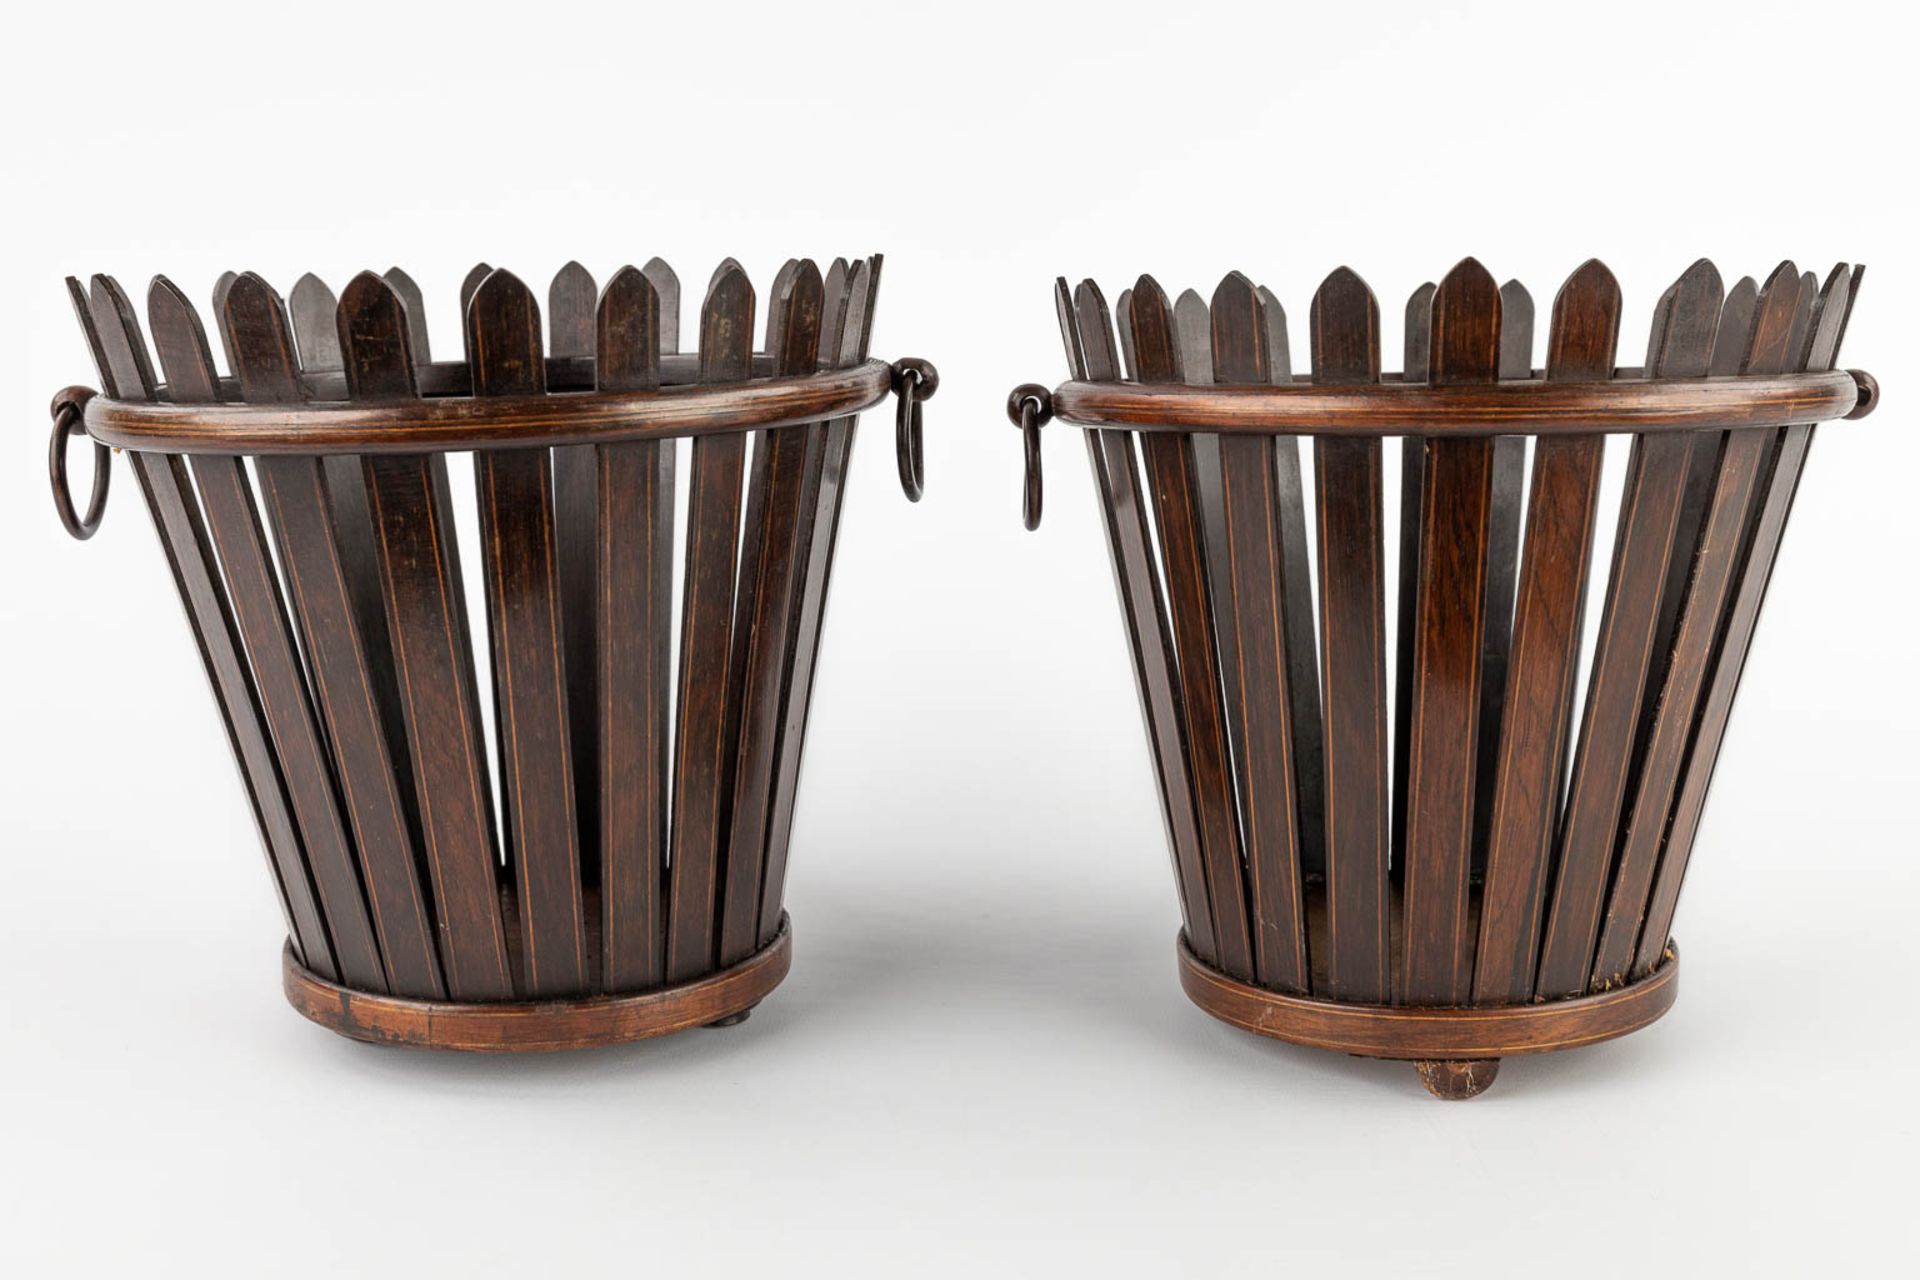 A pair of Edwardian flower baskets, mahogany, England. (H:21 x D:23 cm) - Image 3 of 11